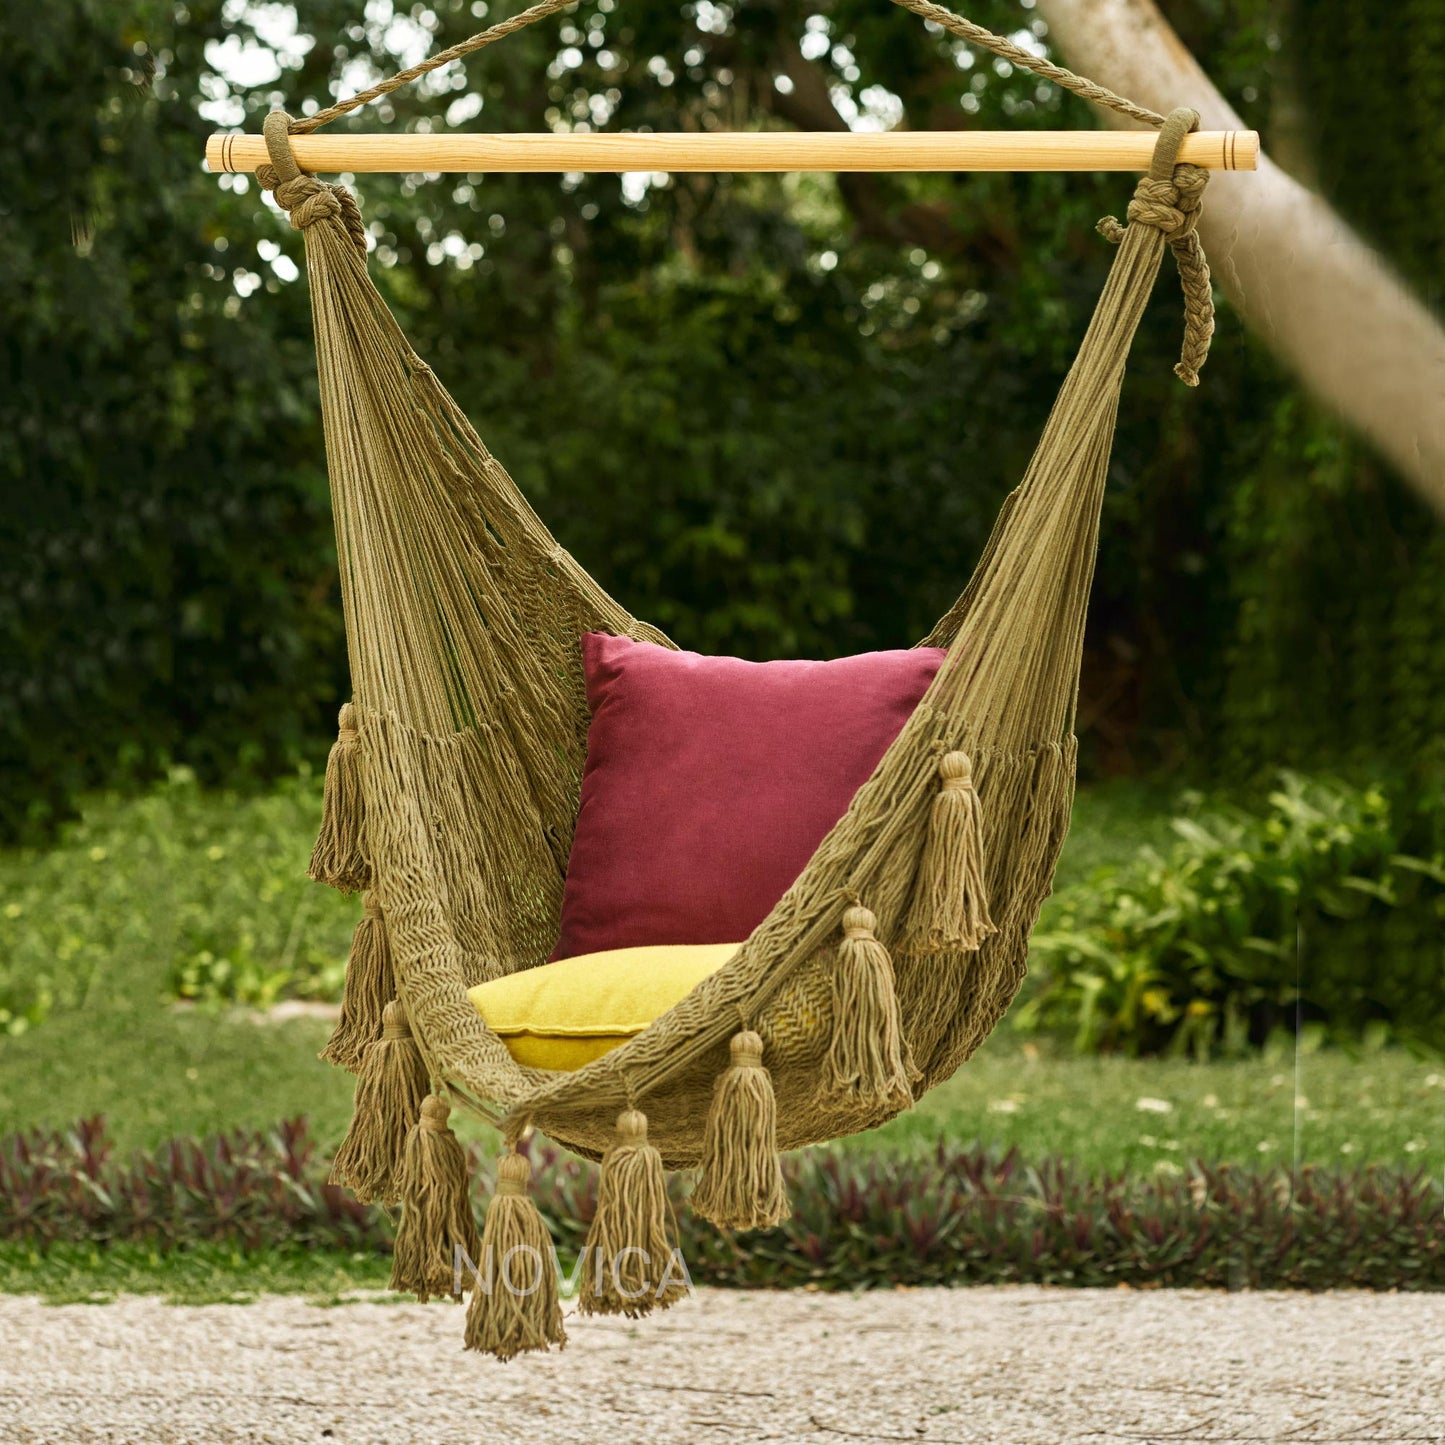 Ocean Seat in Olive Green Tasseled Cotton Rope Mayan Hammock Swing from Mexico